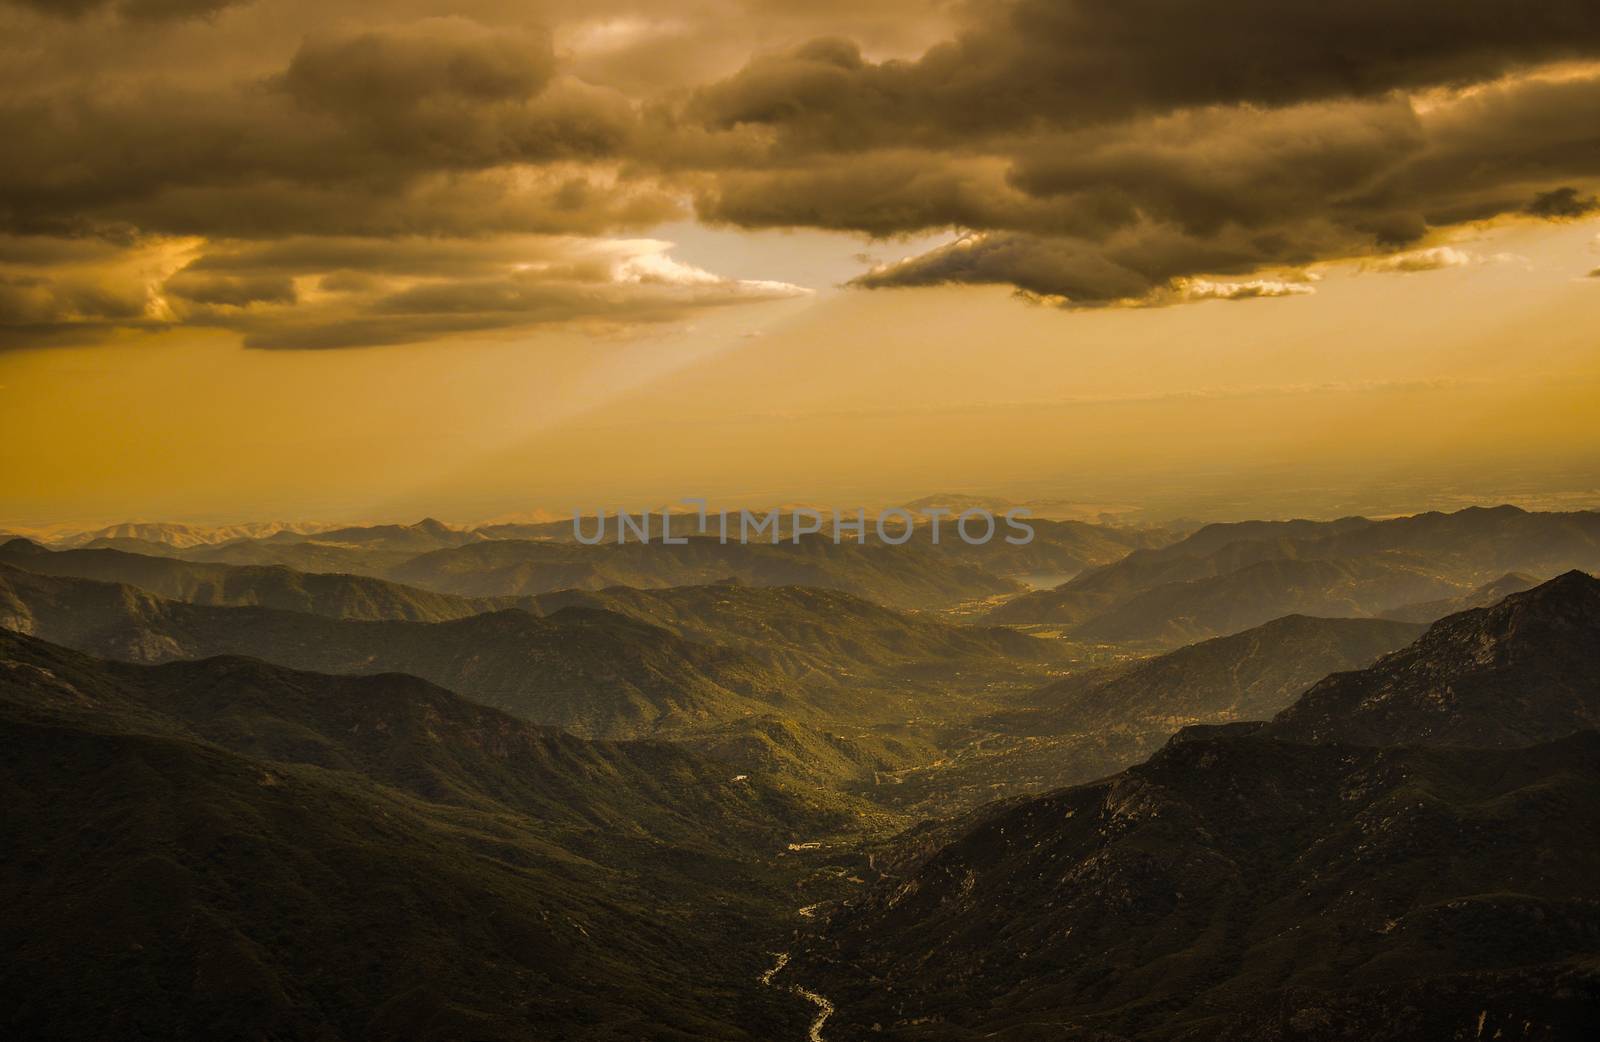 Cloudy Sunset over Sequoia National Park by nickfox